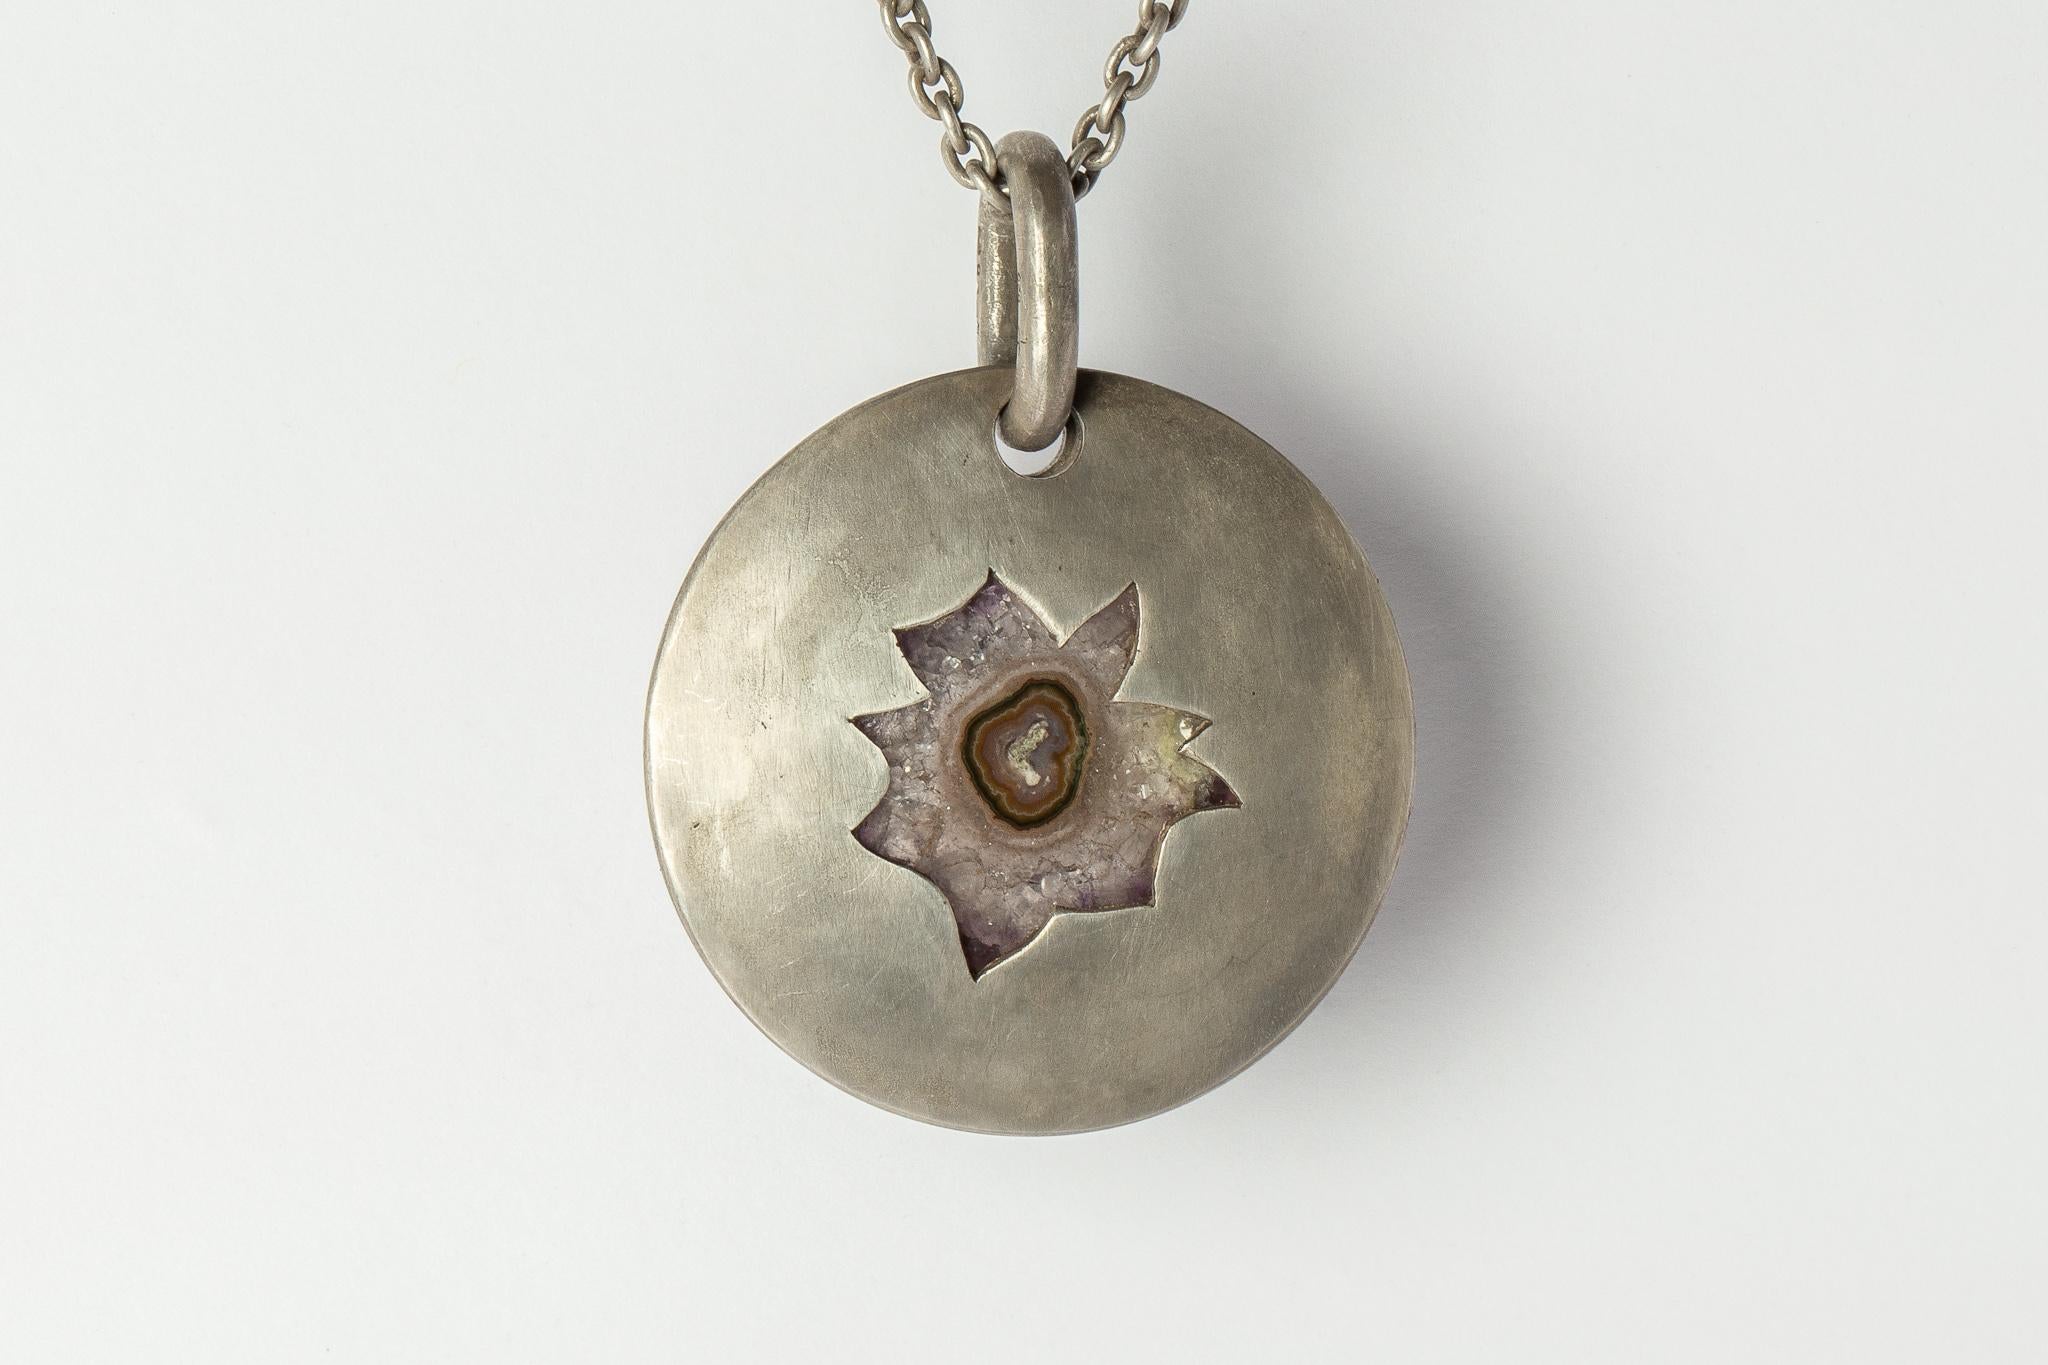 Pendant necklace in the disk shape made in dirty sterling and a slab of amethyst cross section stalactite. Sterling silver, dipped in acid to create a subdued surface. Results will never be identical, and this nuance / variation should be seen as a